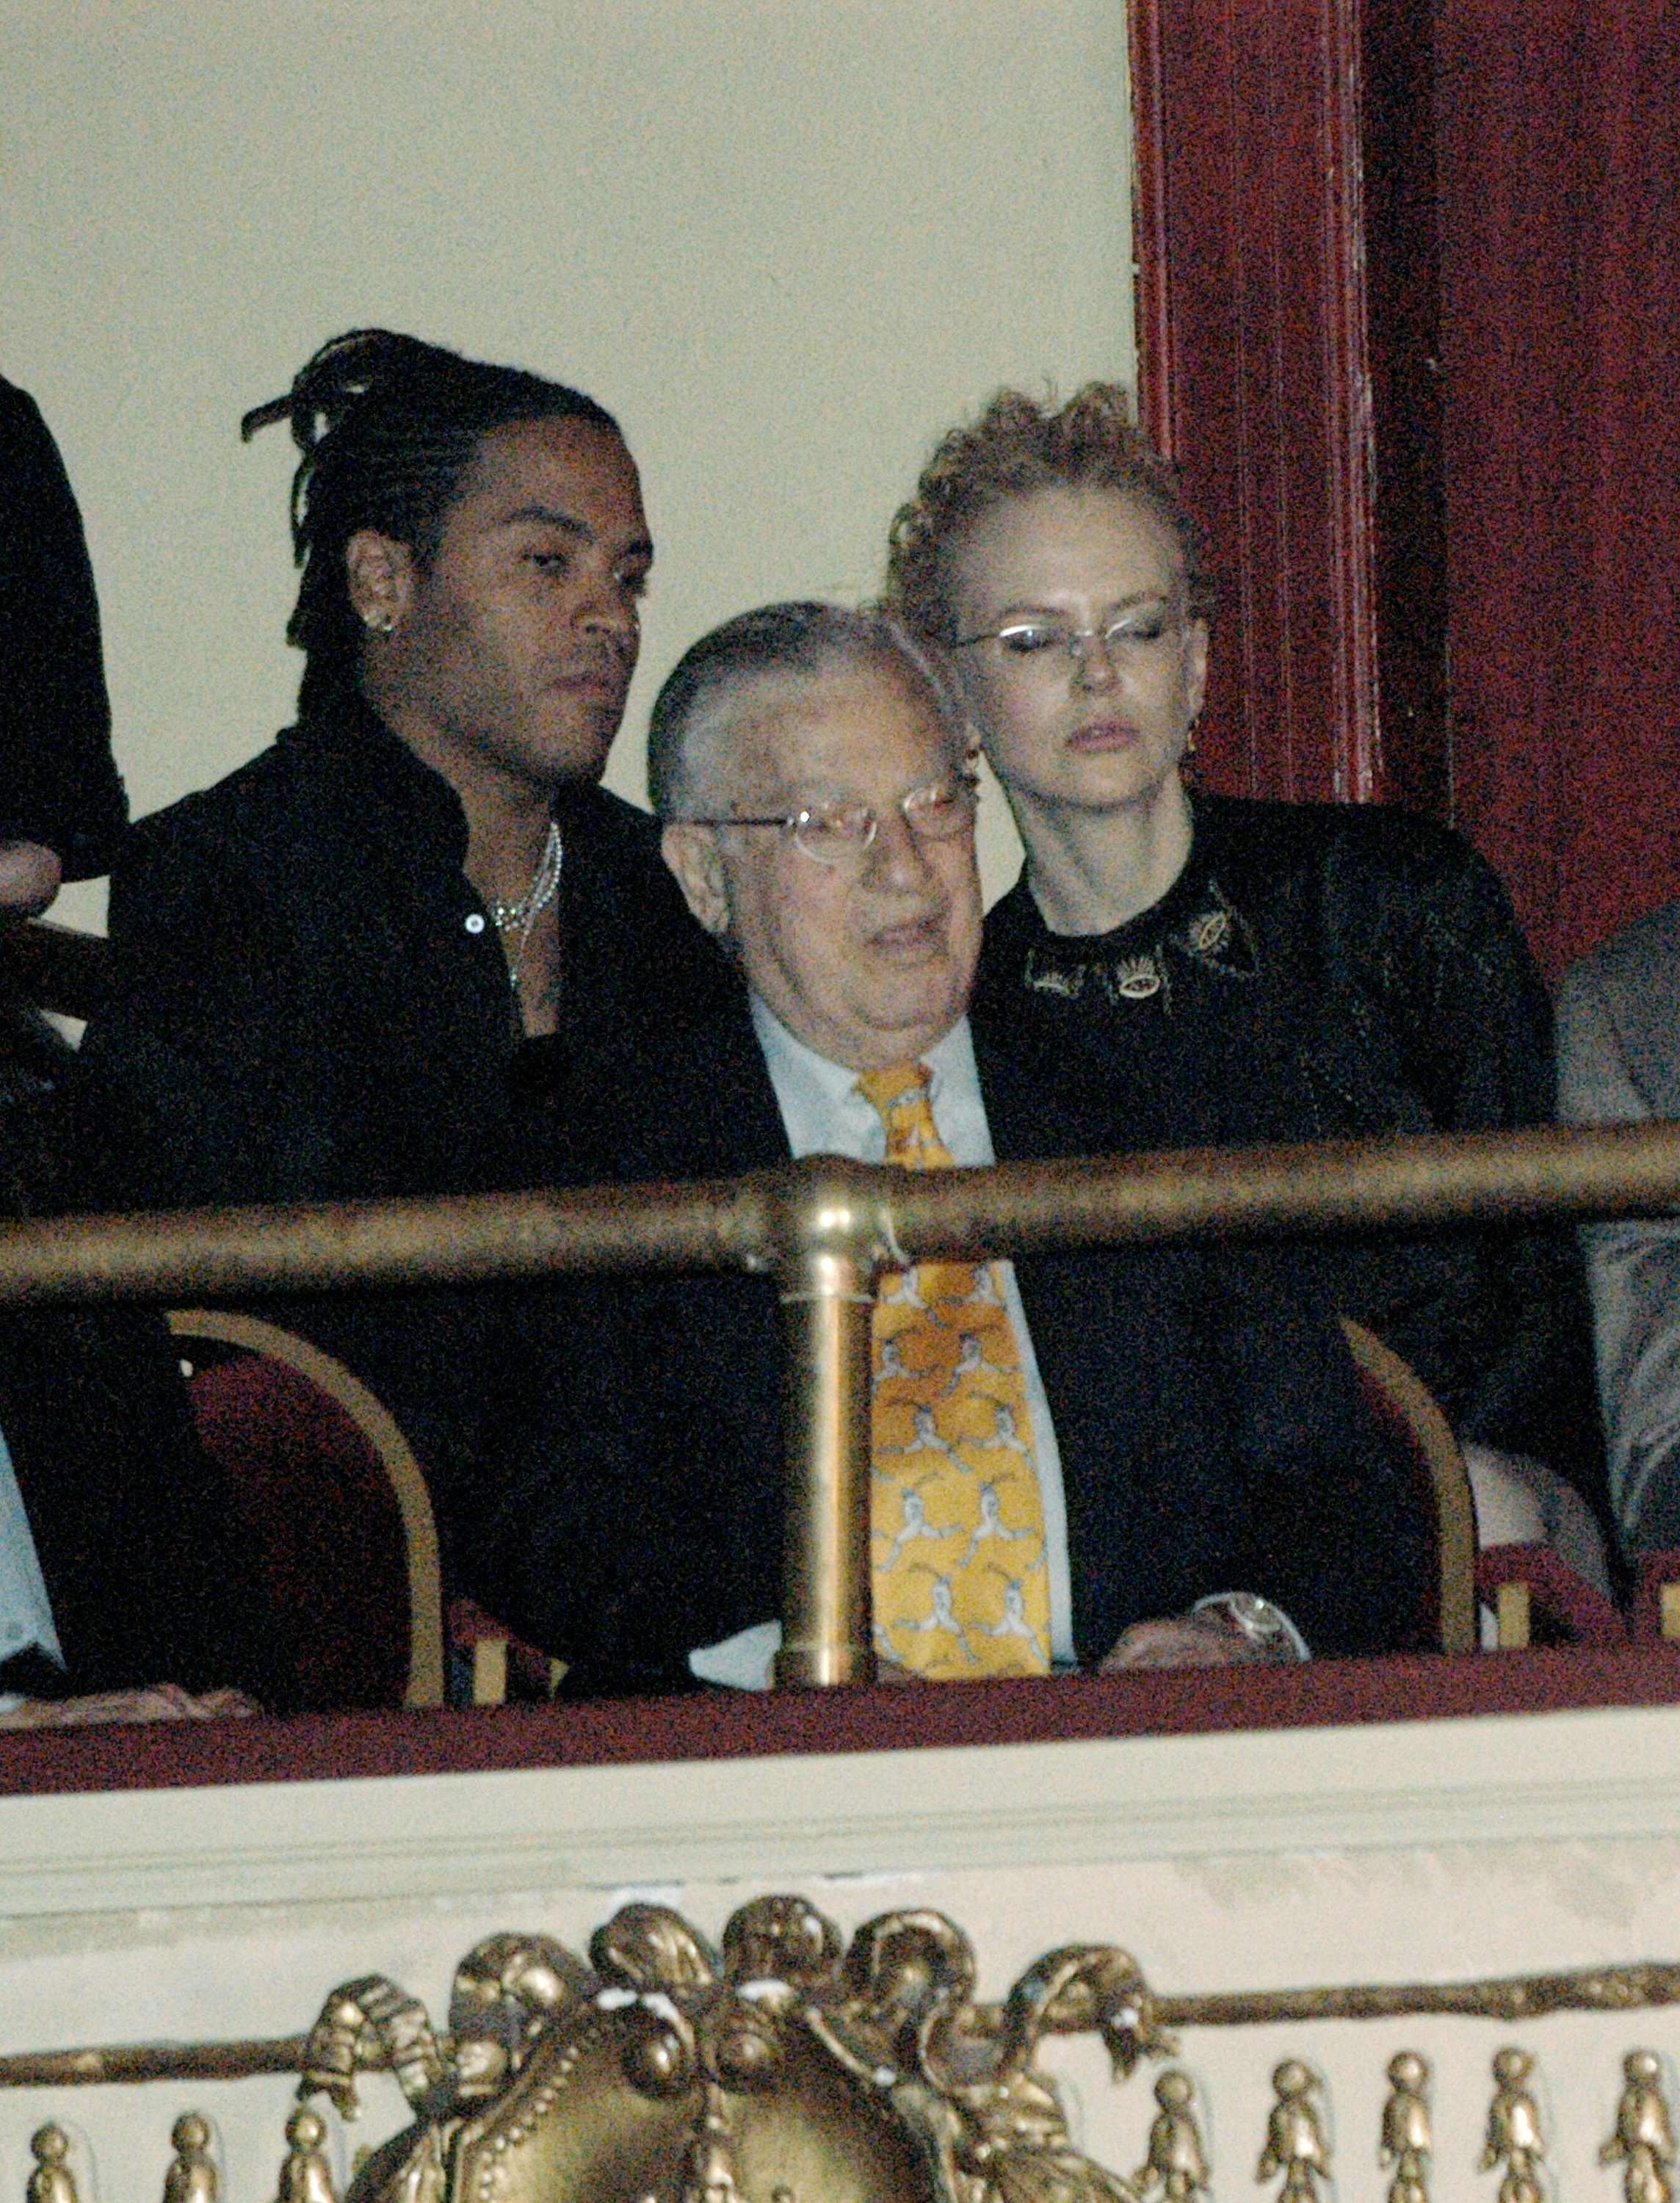 Lenny and Nicole seated in a theater box together